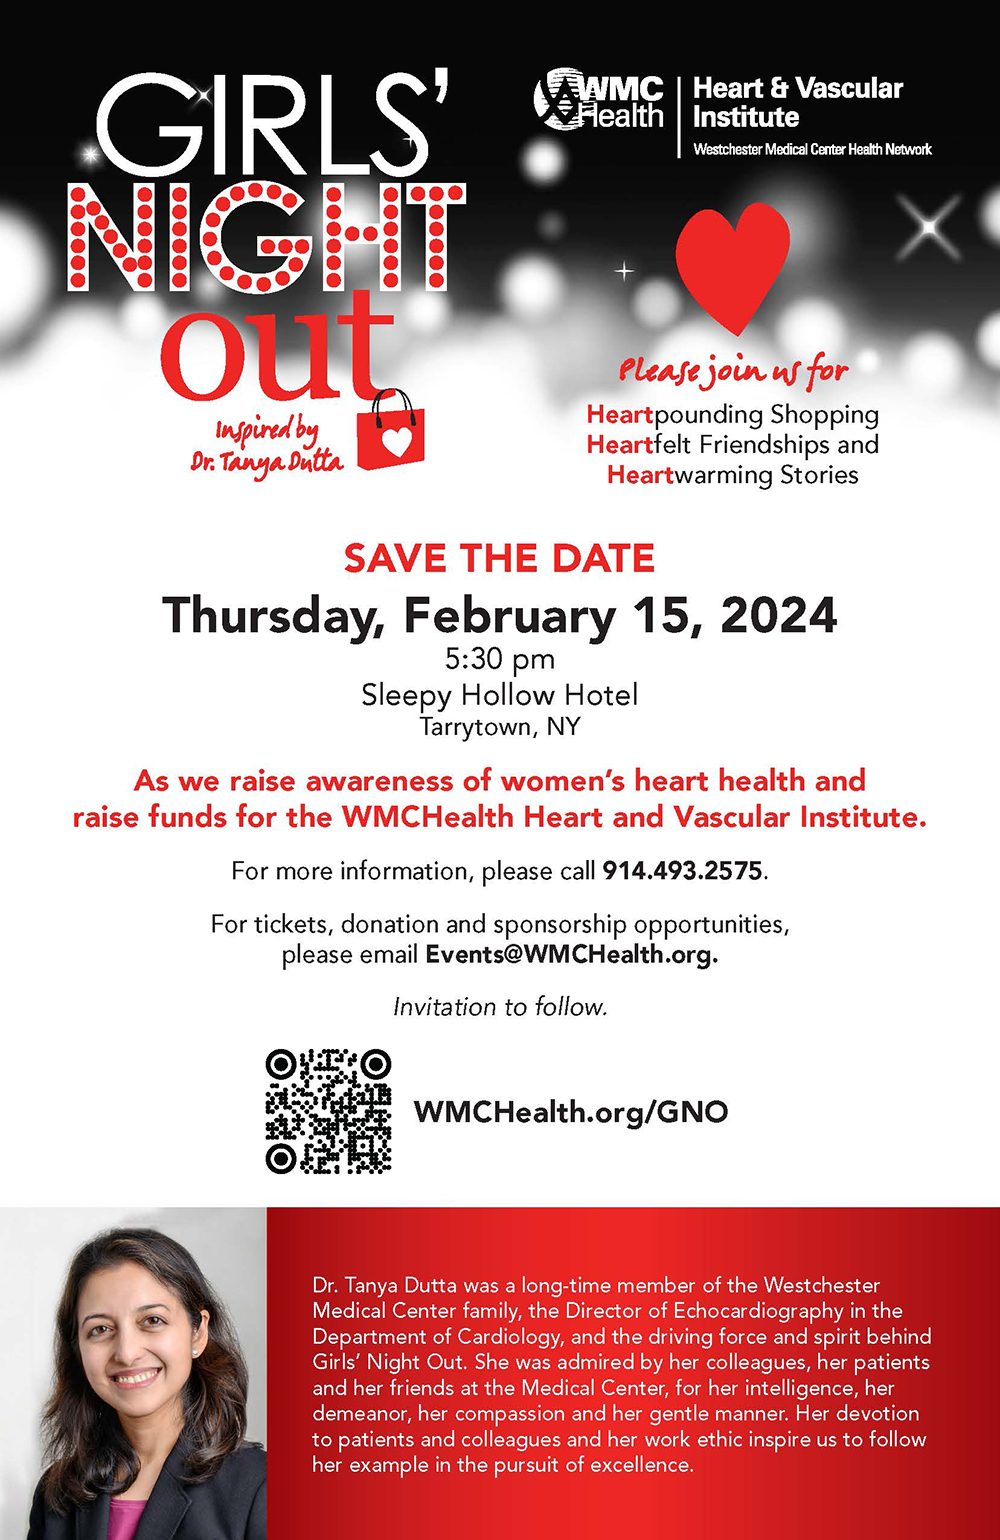 Girls' Night Out, Feb 15, 2024. Call 914.493.2575 for more information.